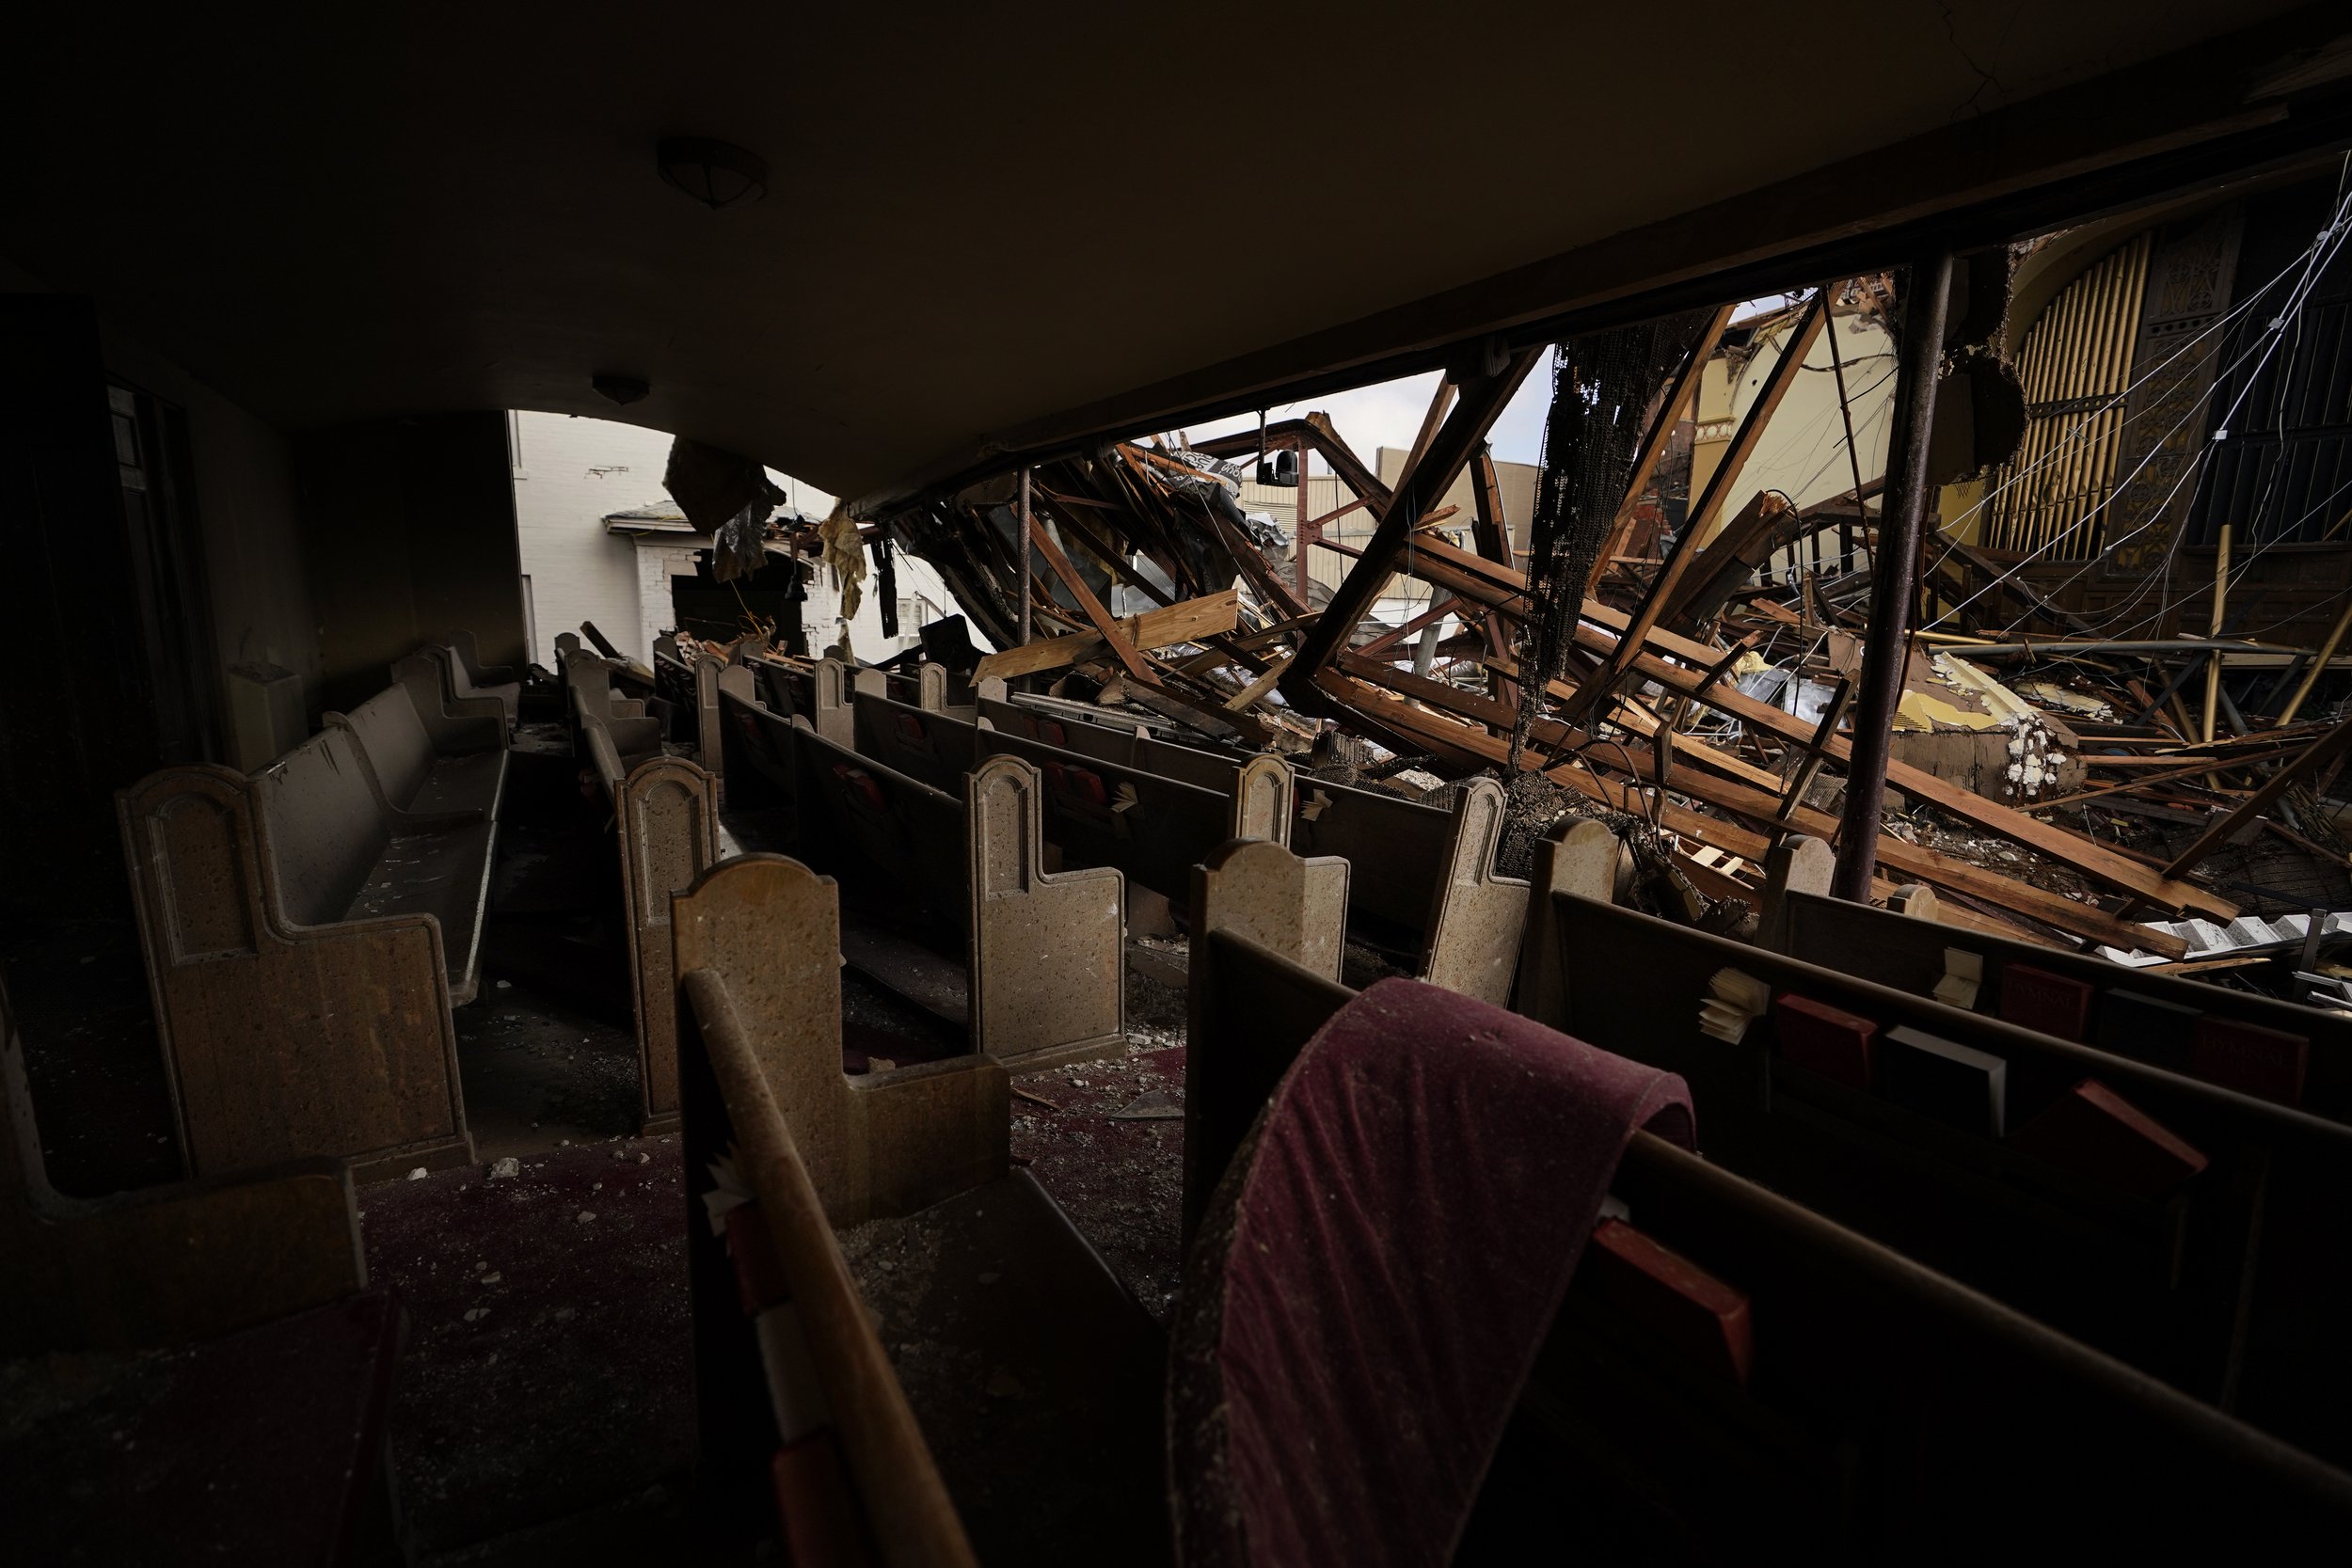  The roof is collapsed between the pews and the organ pipes in the First United Methodist church in Mayfield, Ky., on Dec. 19, 2021. (AP Photo/Brynn Anderson) 